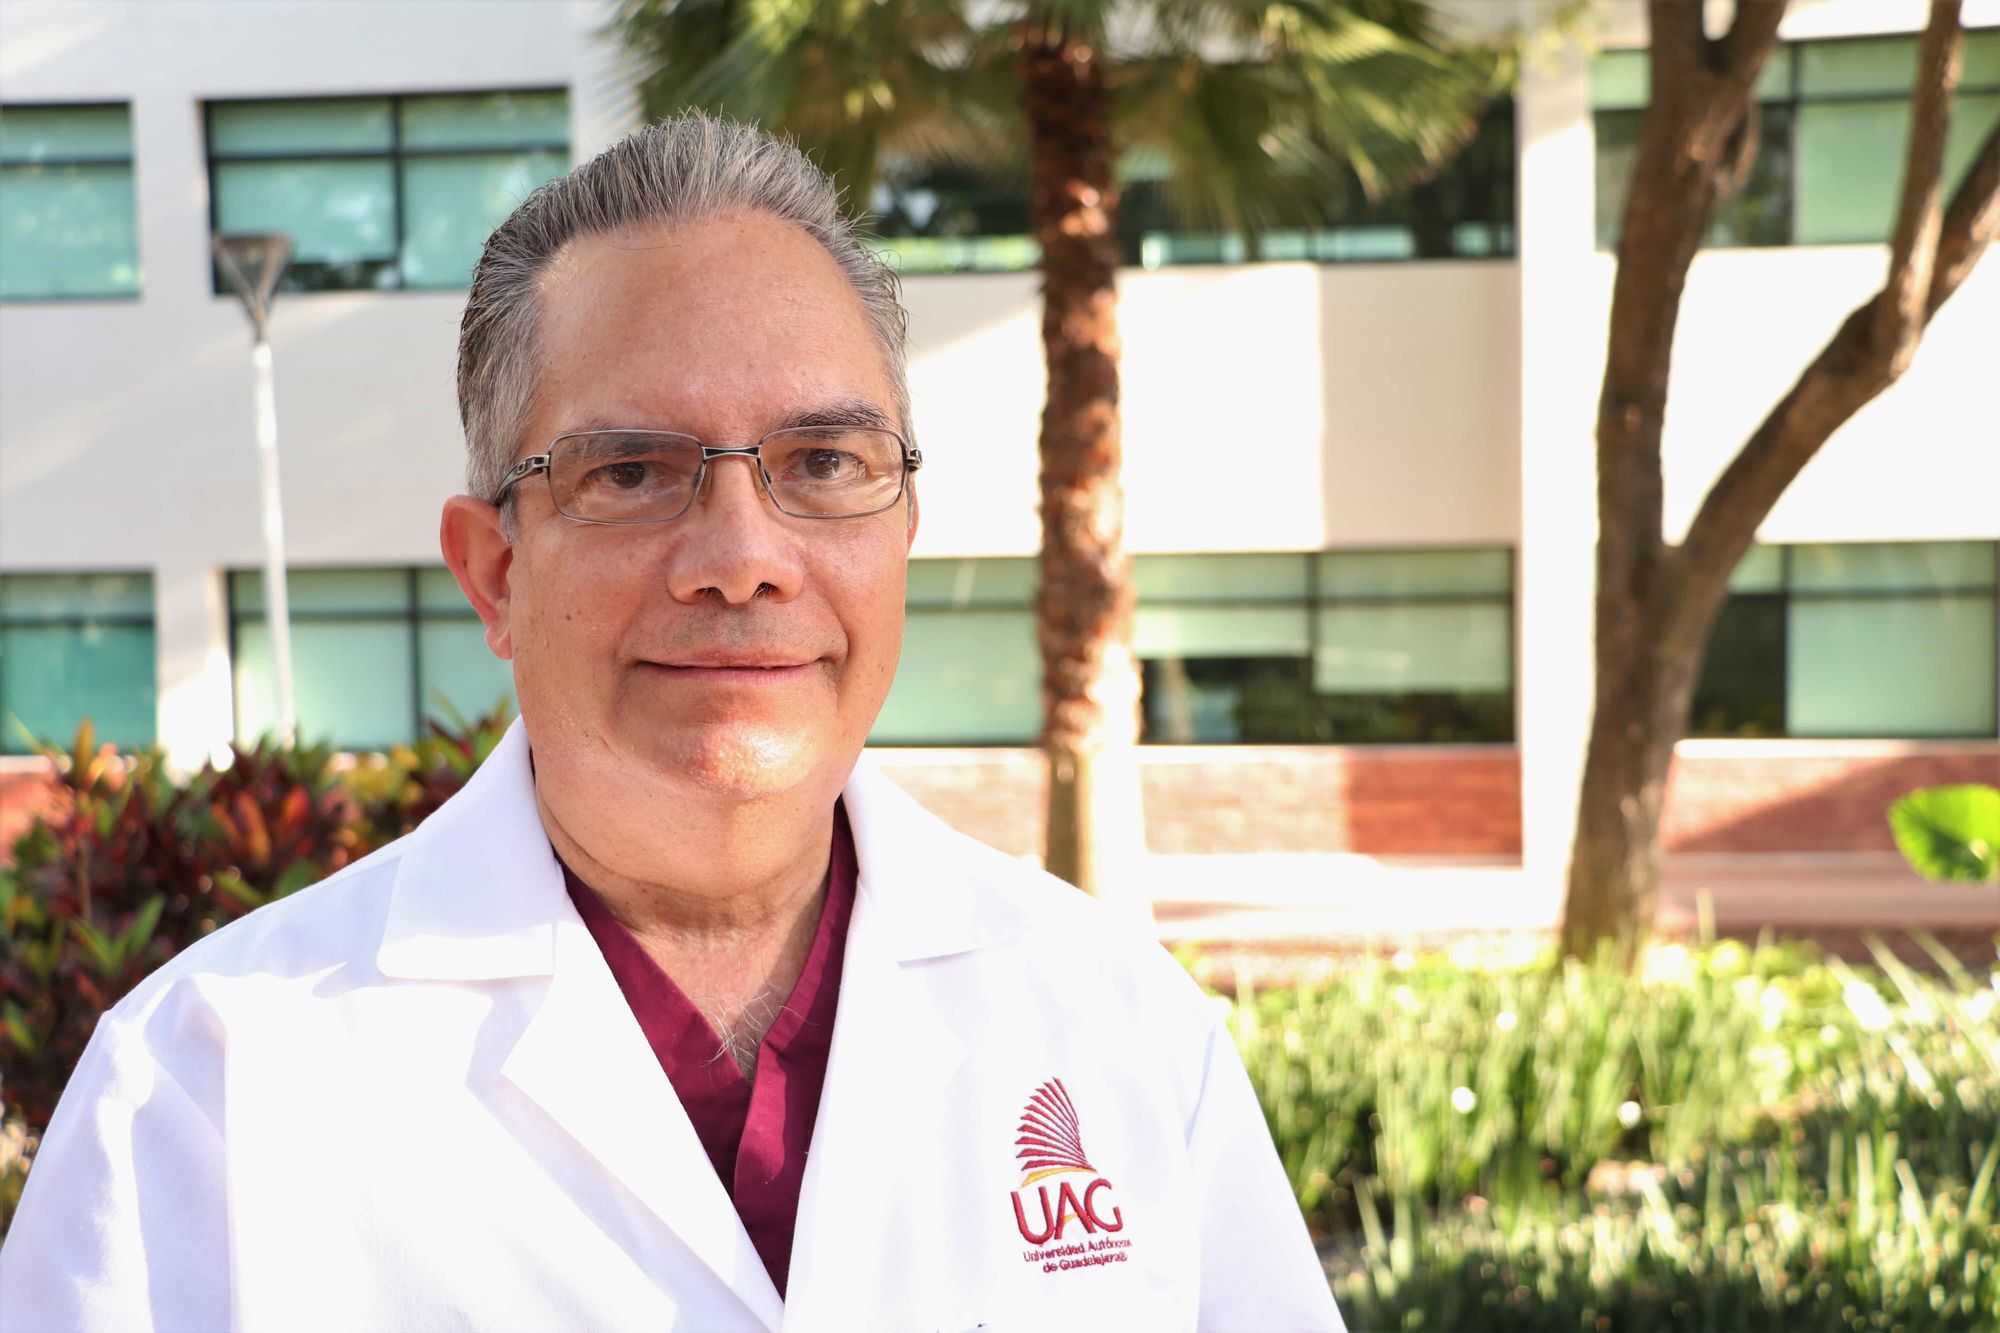 Dr. Mauricio Amante Díaz, Professor of Physical Therapy at the Autonomous University of Guadalajara.